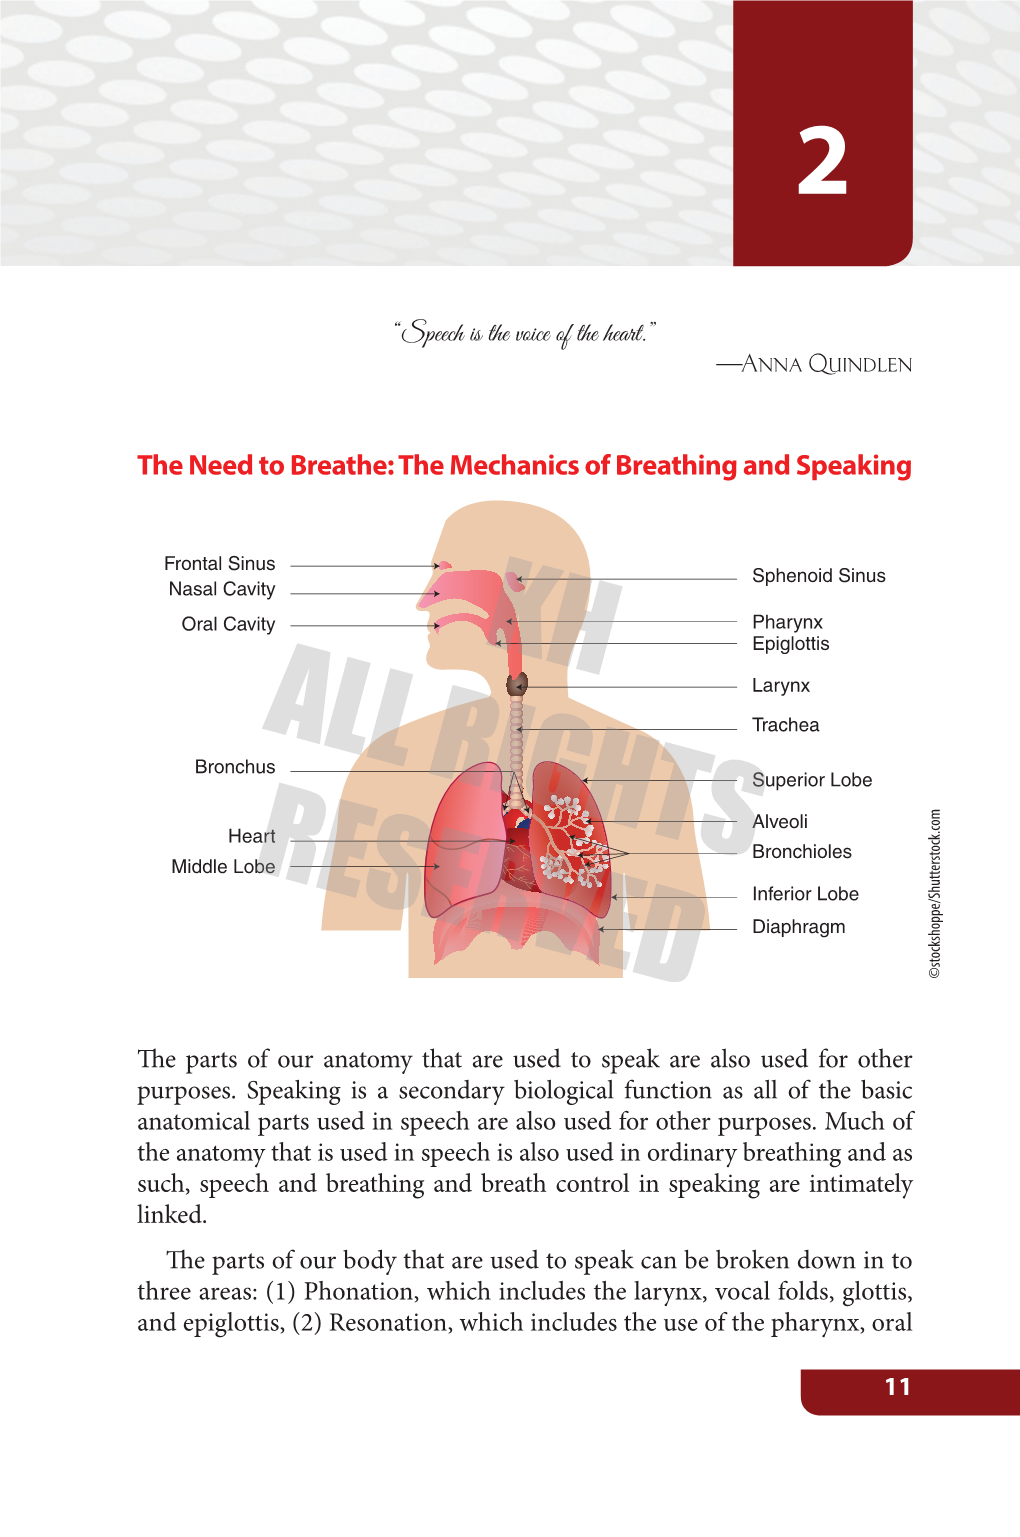 The Mechanics of Breathing and Speaking